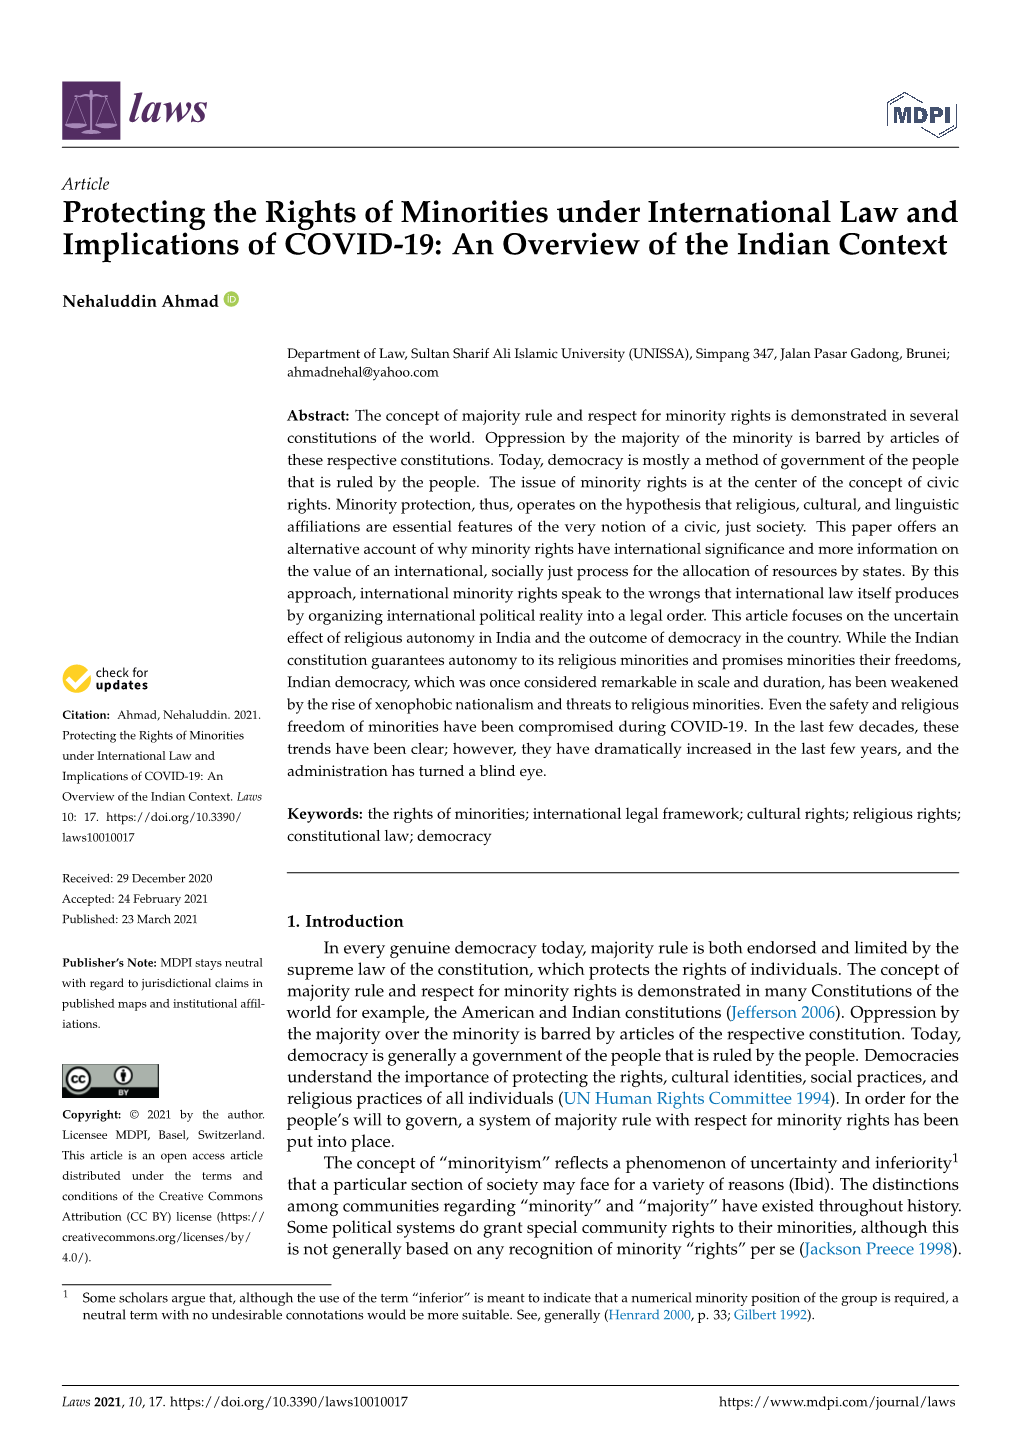 Protecting the Rights of Minorities Under International Law and Implications of COVID-19: an Overview of the Indian Context